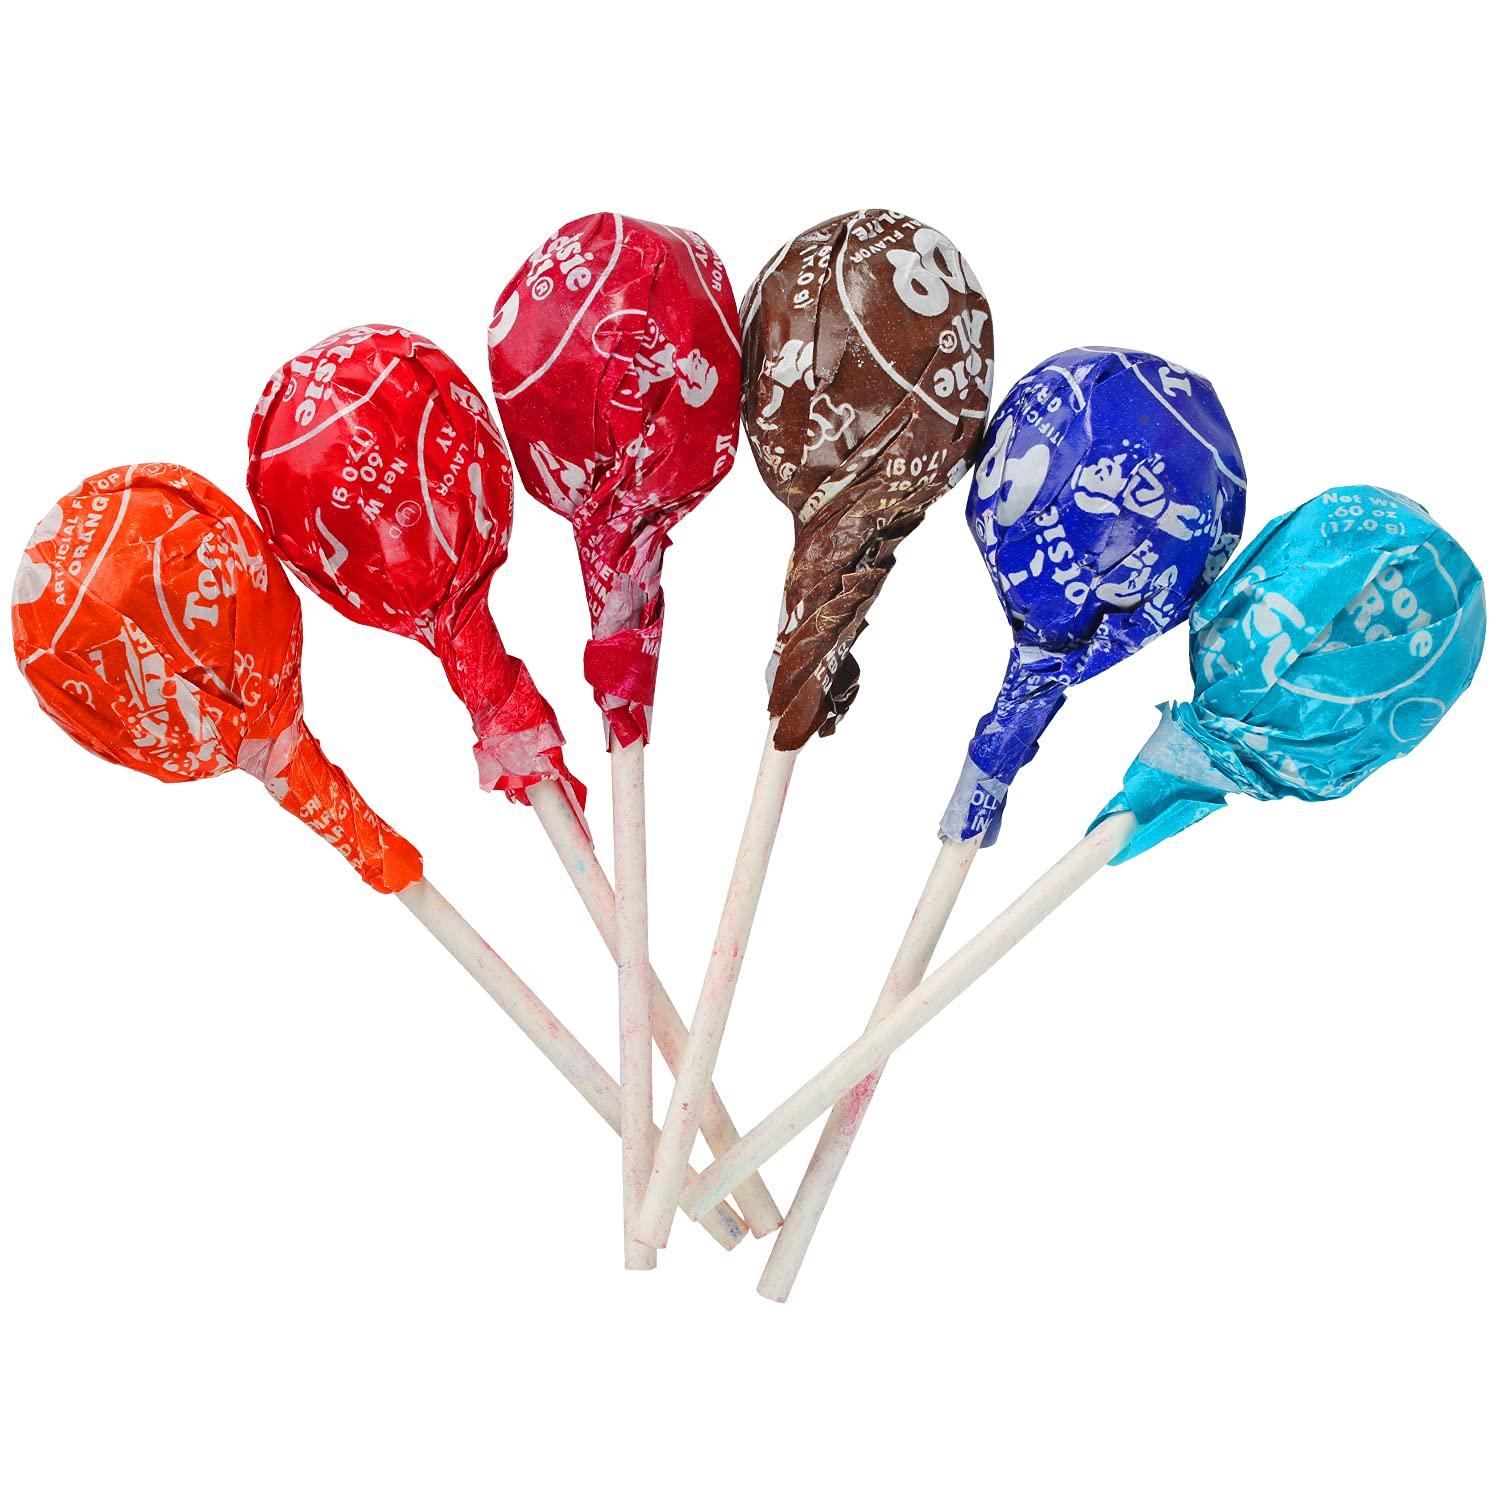 Tootsie Pops - 5 Pounds - Large Tootsie Roll Pops - Assorted Flavored  Lollipops - Bulk Candy Party Bag Family Size 5 Pound (Pack of 1)